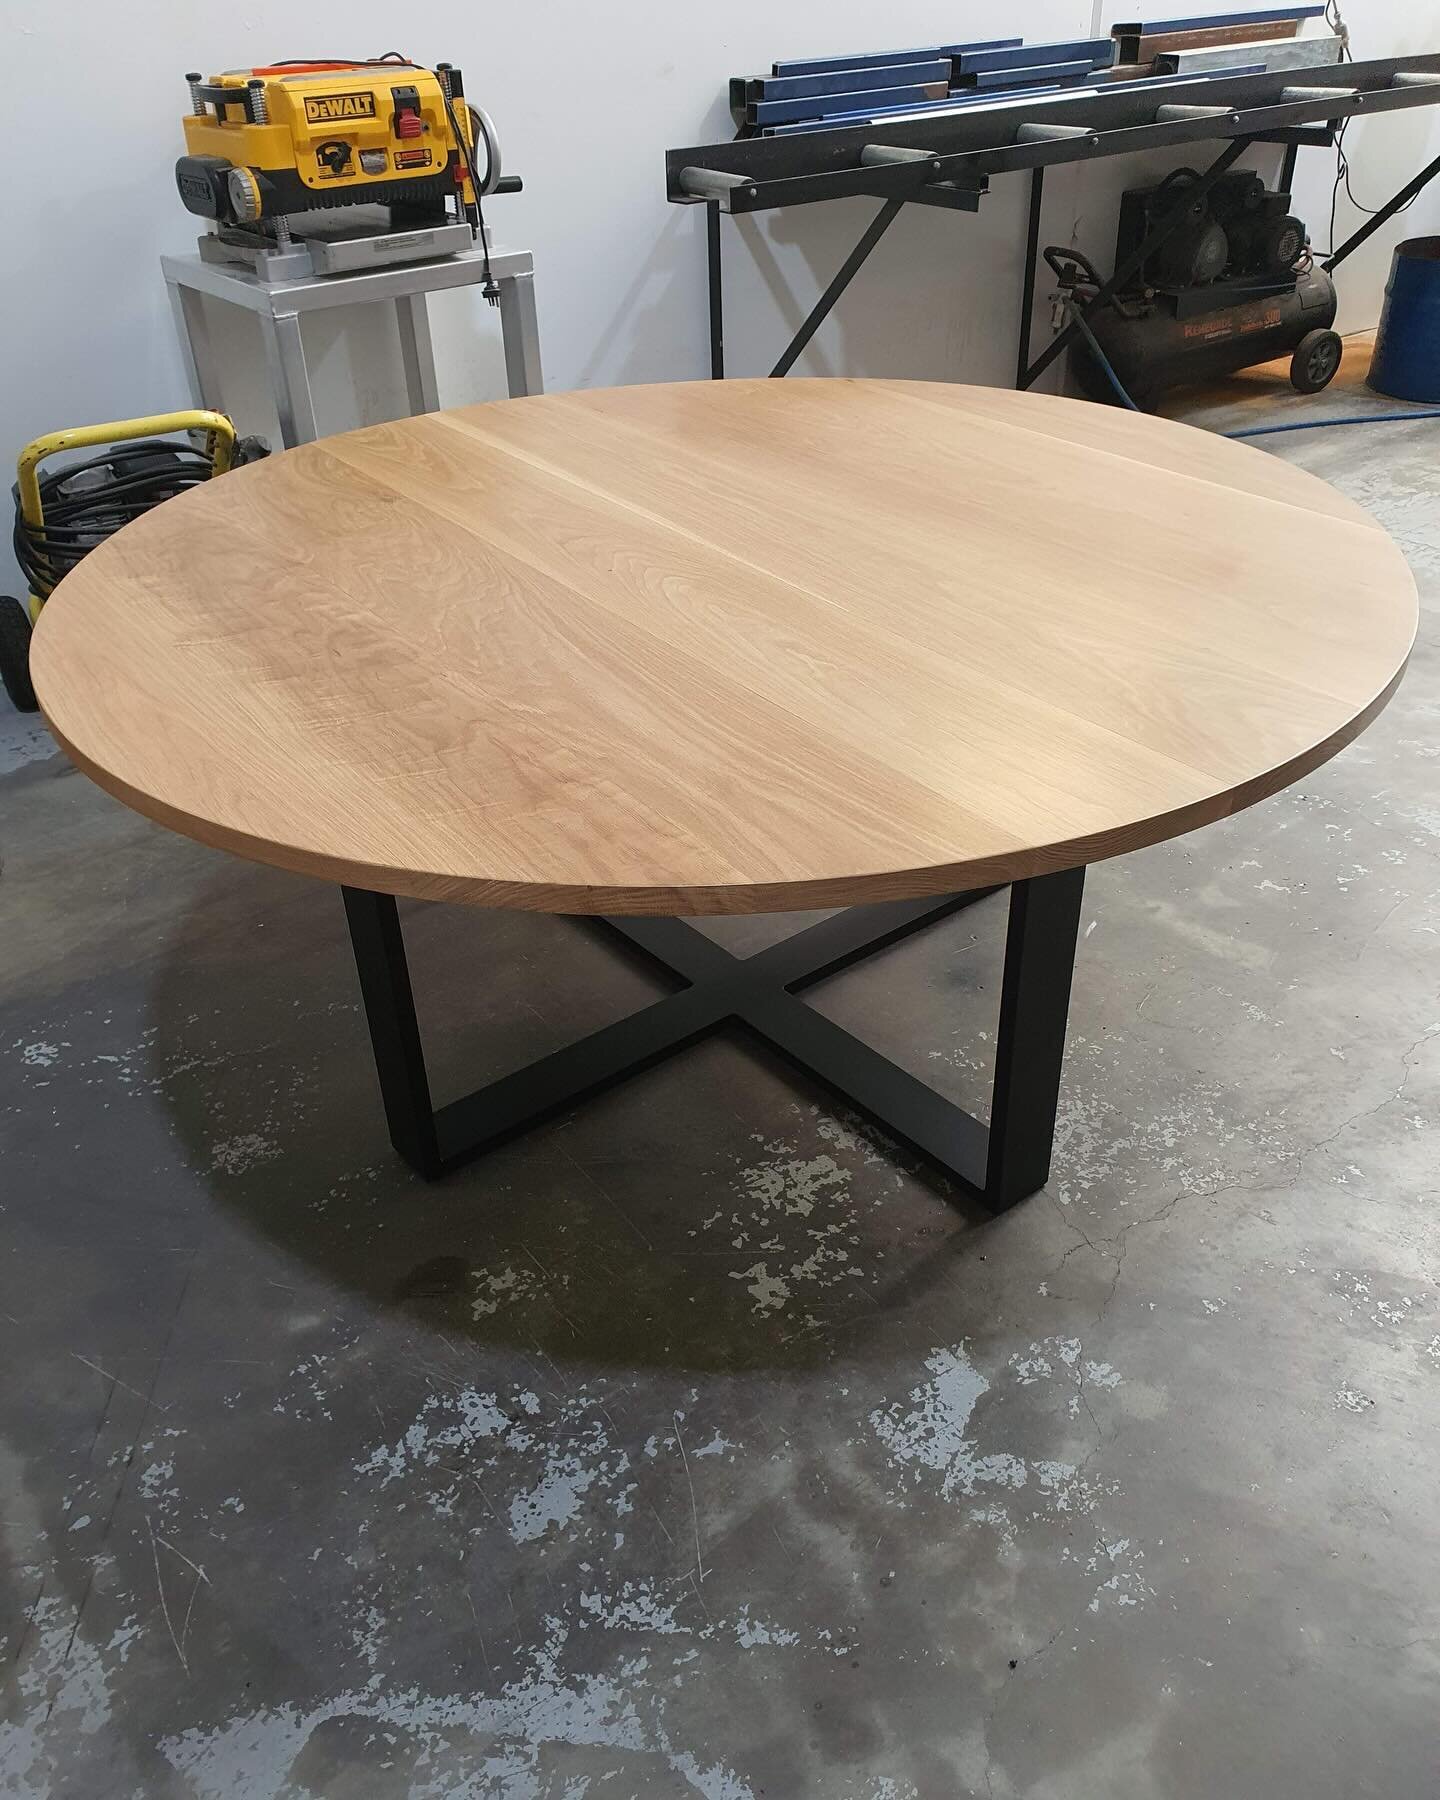 The Round Table Rush is still with us this week, each Design is timeless and will stand the test of time 🙌🏼 Contact us today for more Info thingsofmetalandwood@outlook.com 
.
.
.
.
#thingsofmetalandwood #roundtable #timberfurnituremakers #sunshinec